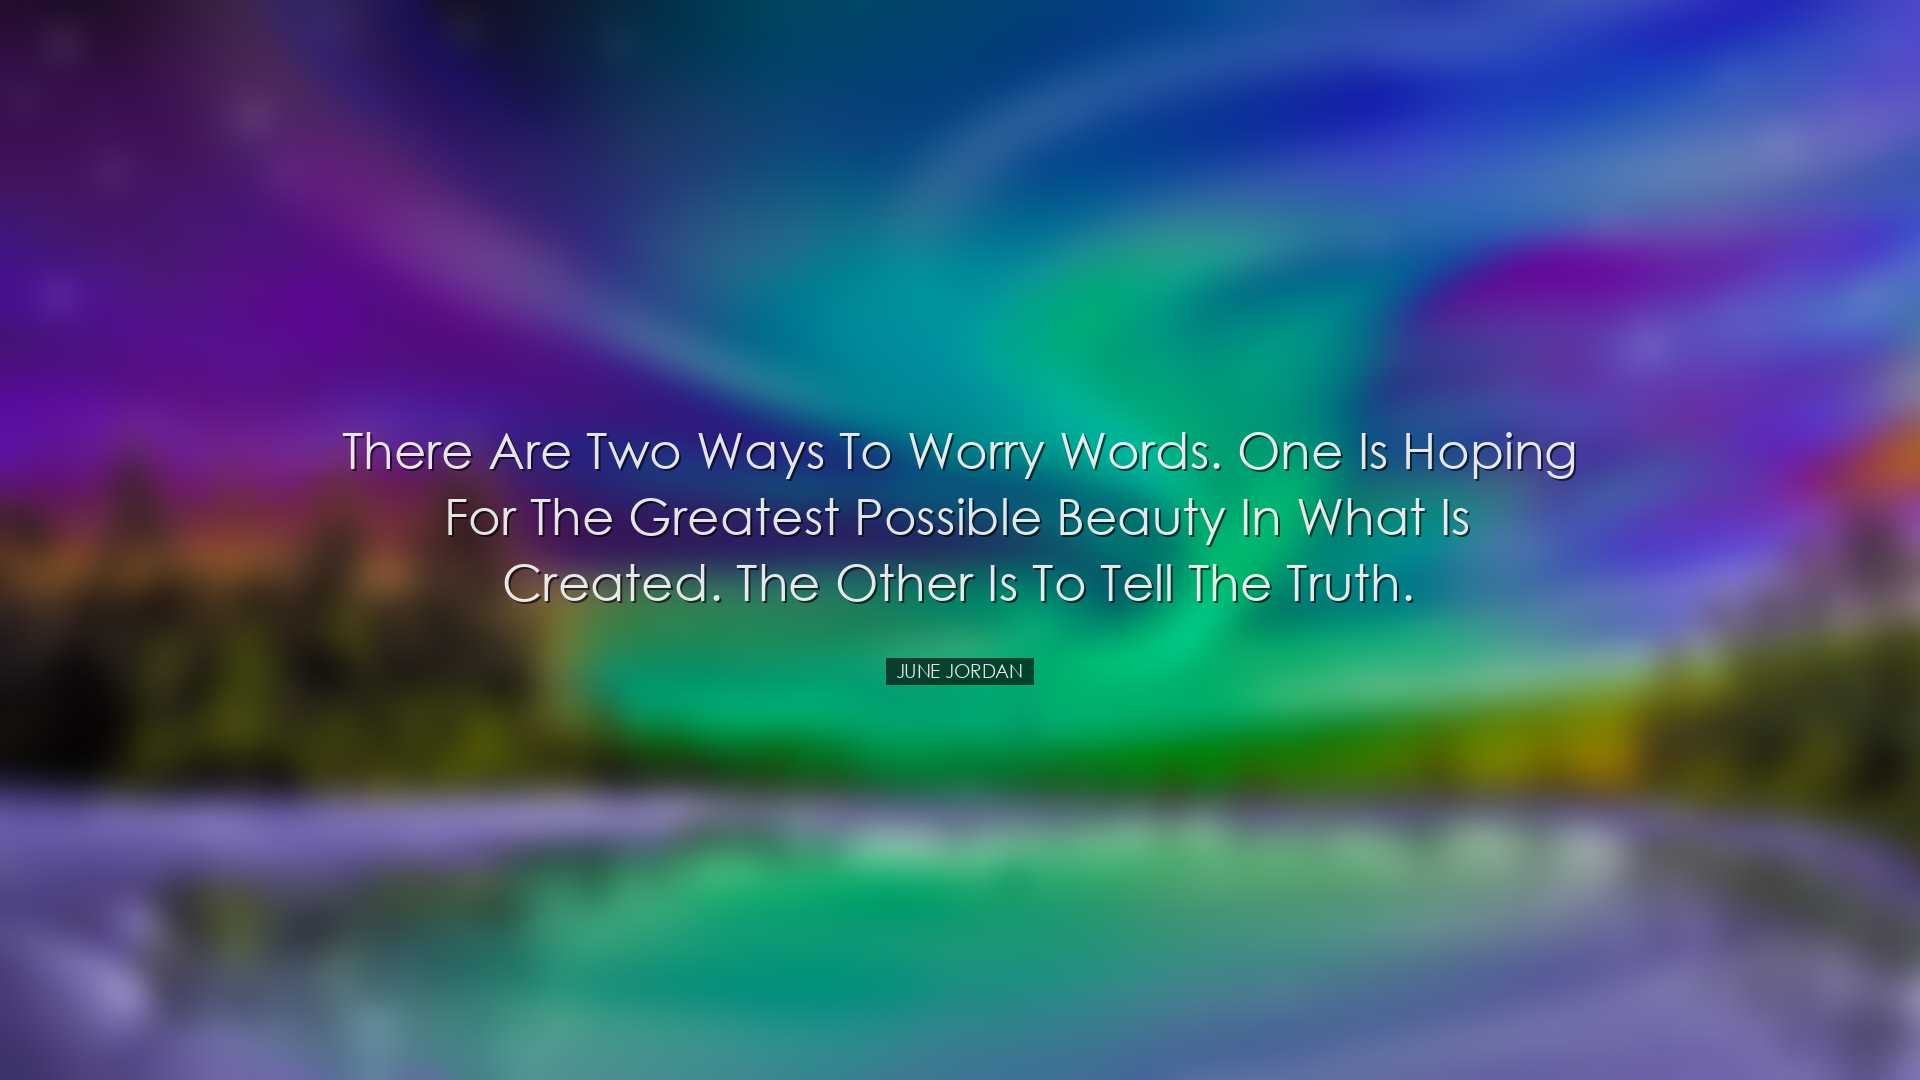 There are two ways to worry words. One is hoping for the greatest